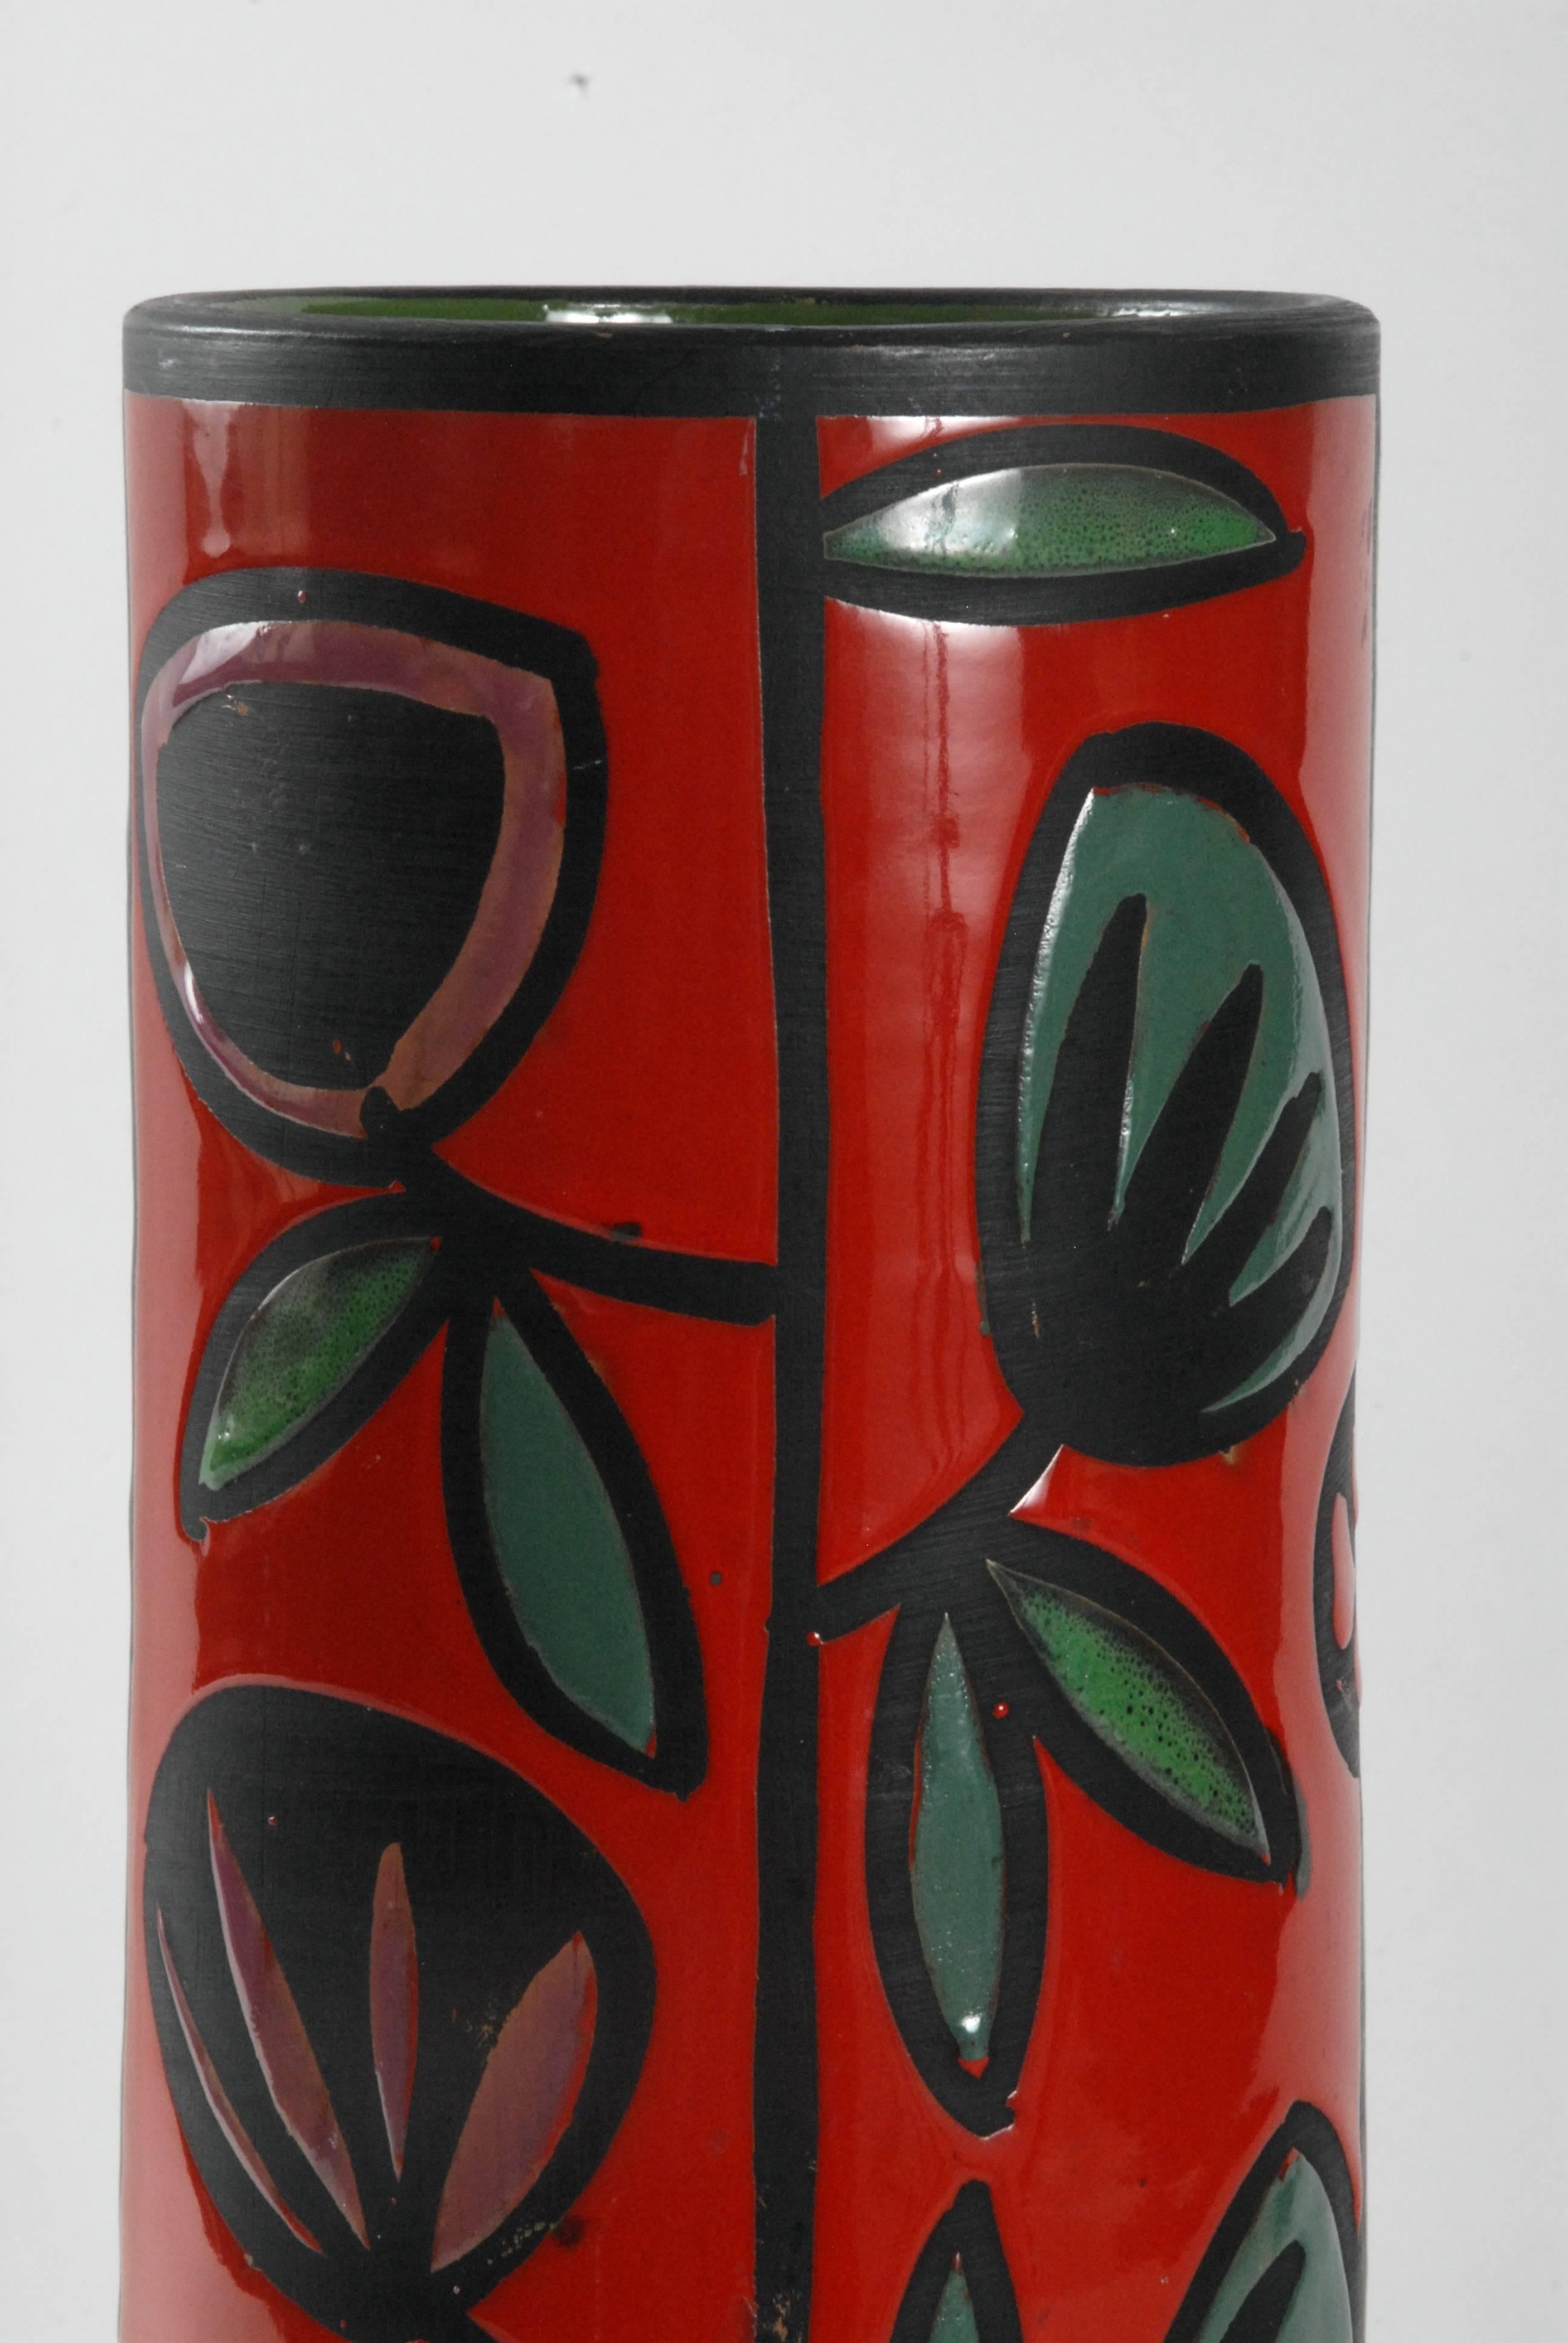 A large cylinder vase designed by Alvino Bagni with green and red vertical panels decorated with a wax-resist pattern of flowers and leaves in excellent condition.